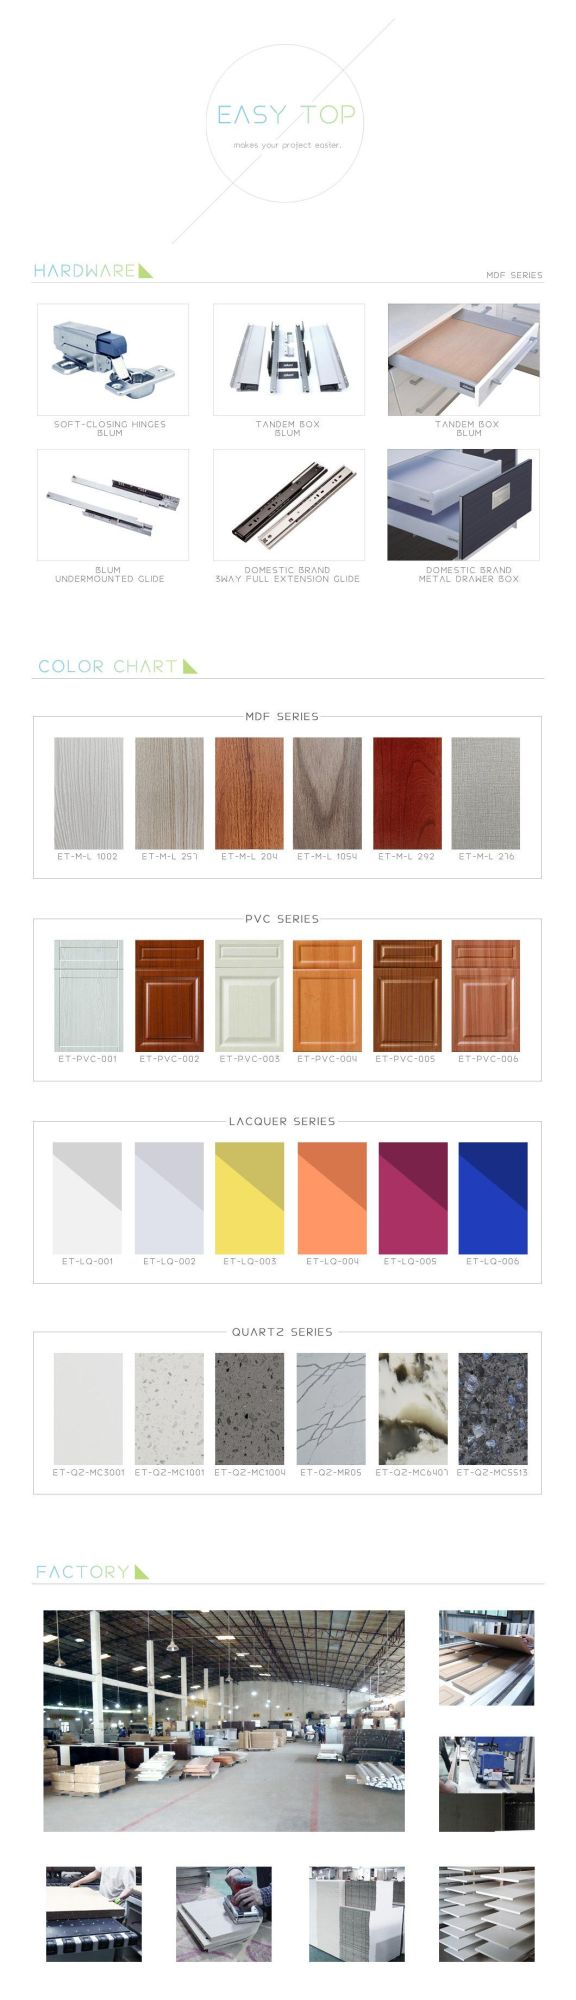 Hot-Sale Modern High Gloss Lacquer Cupboard Complete Kitchen Units Furniture Cabinets